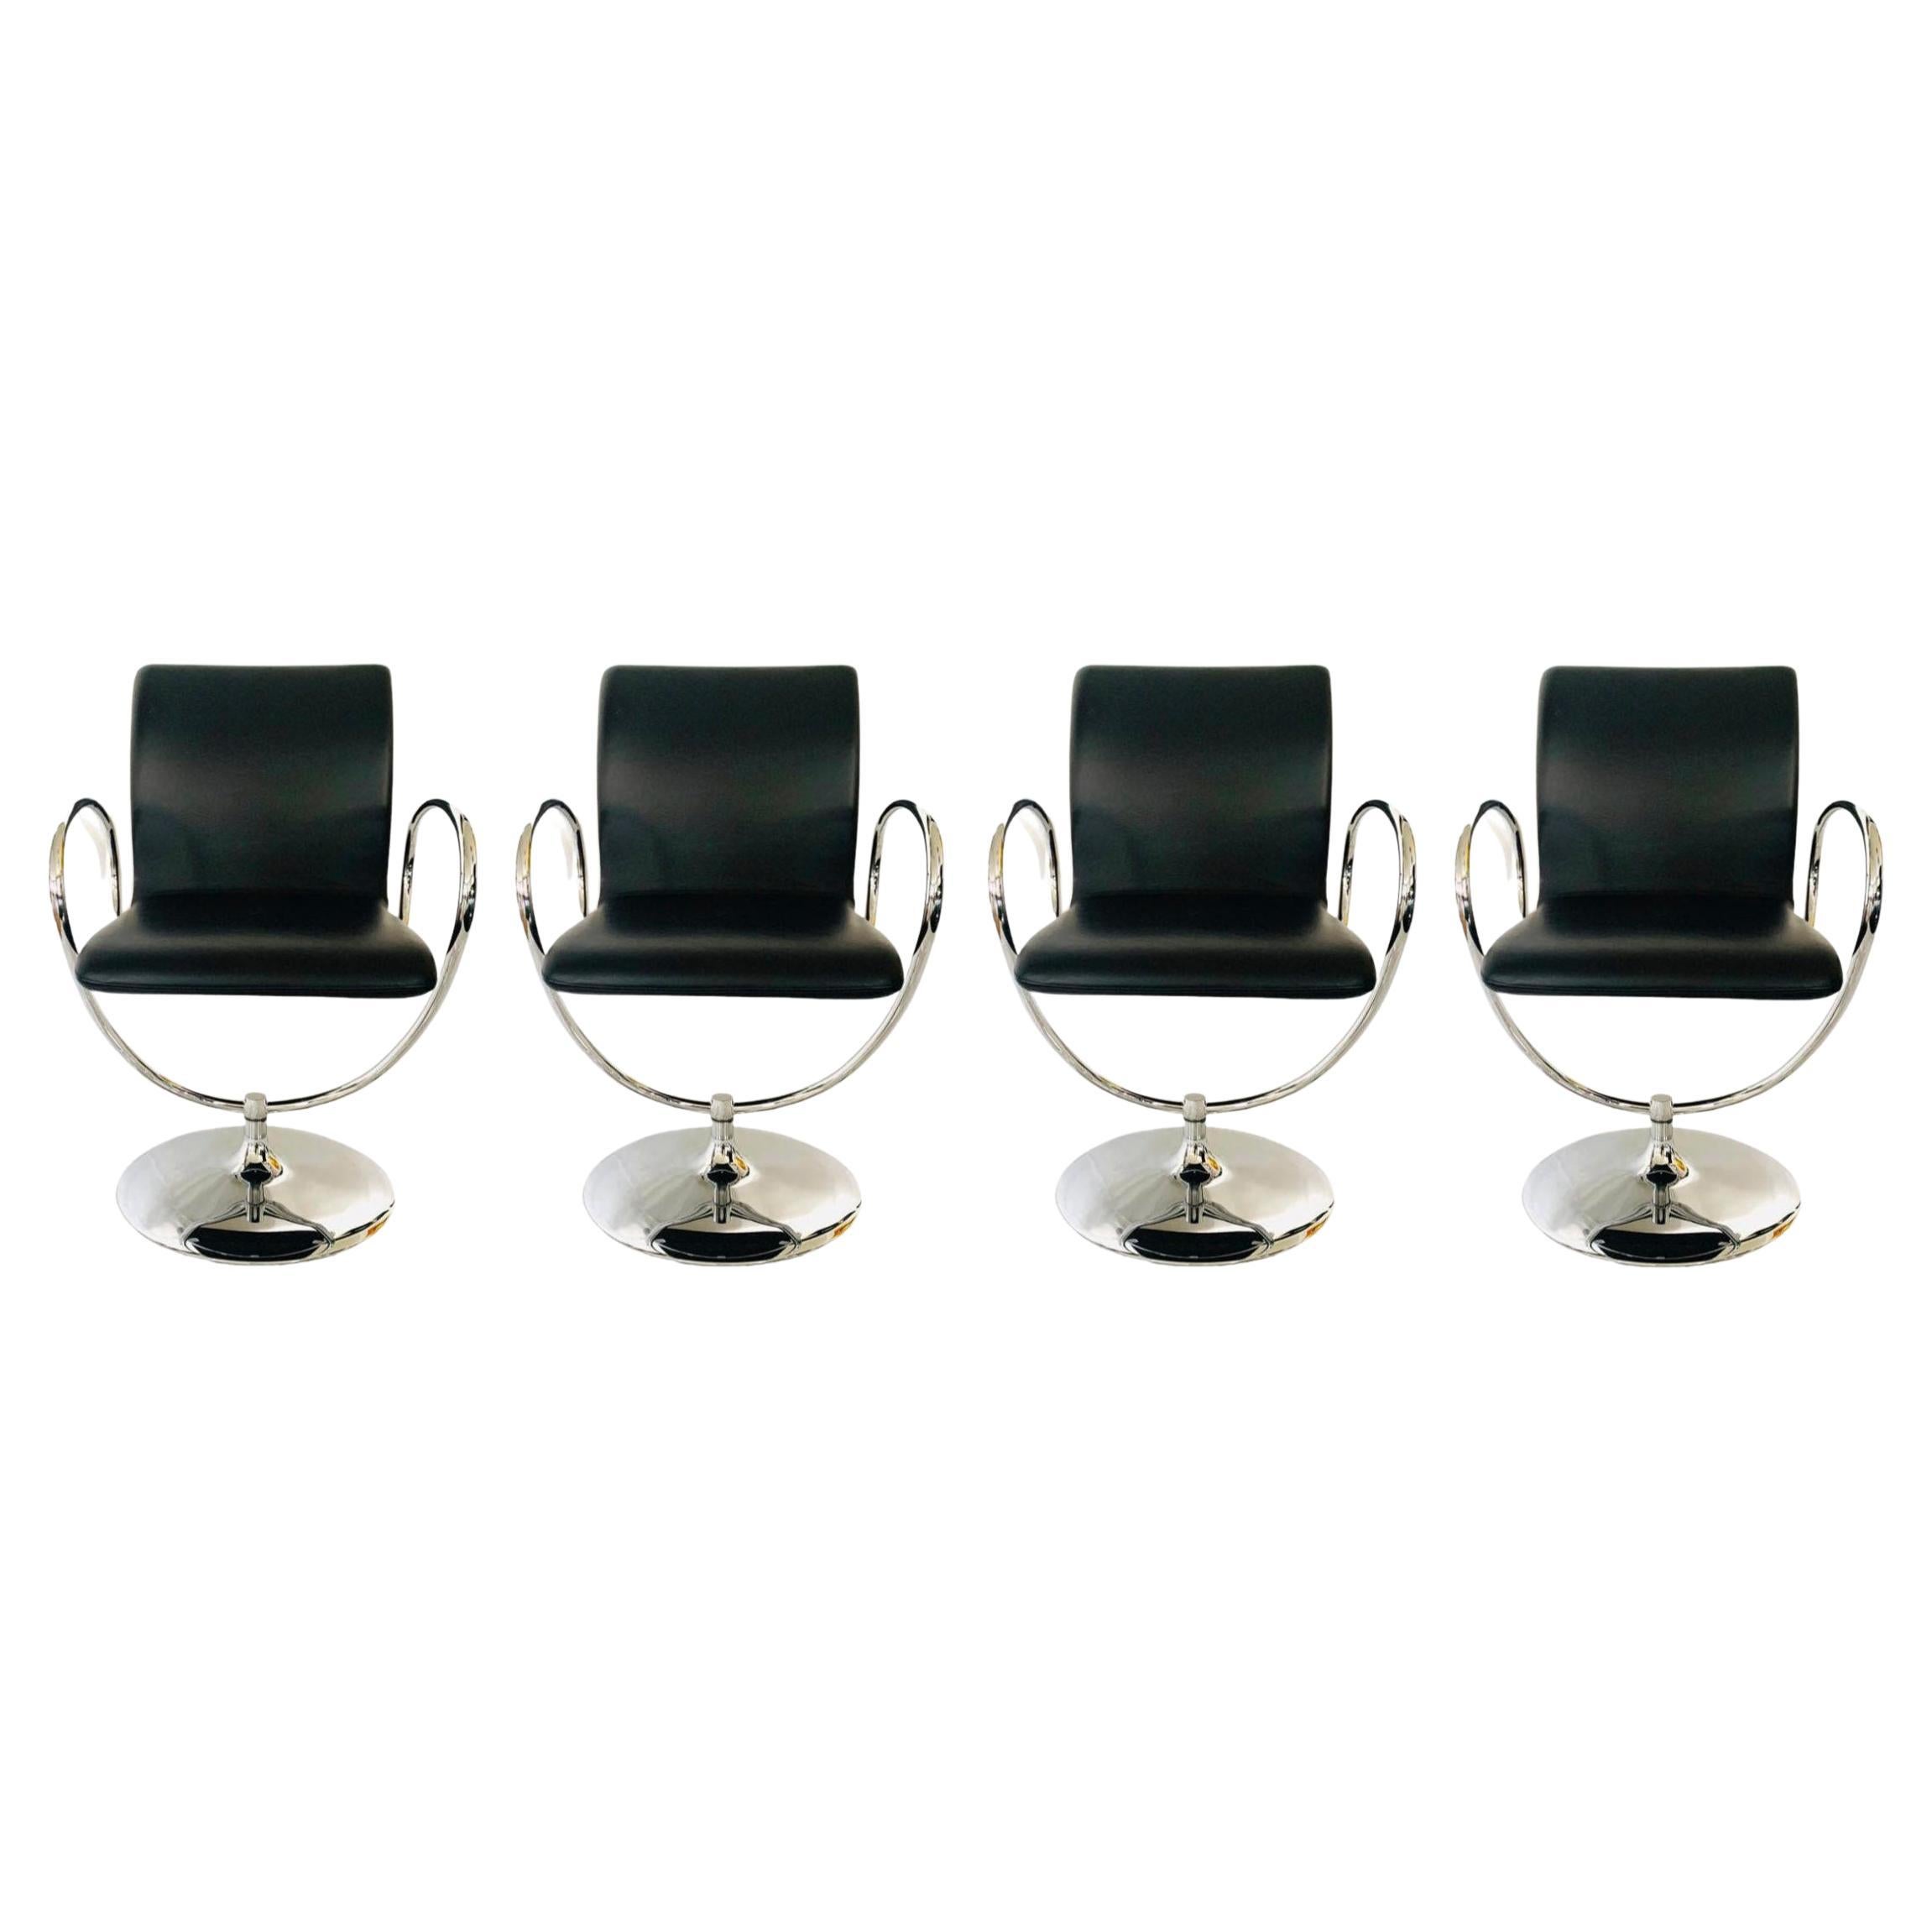 Tonon Swivel Chair Dining Room Living Room Black Leather and stainless steel